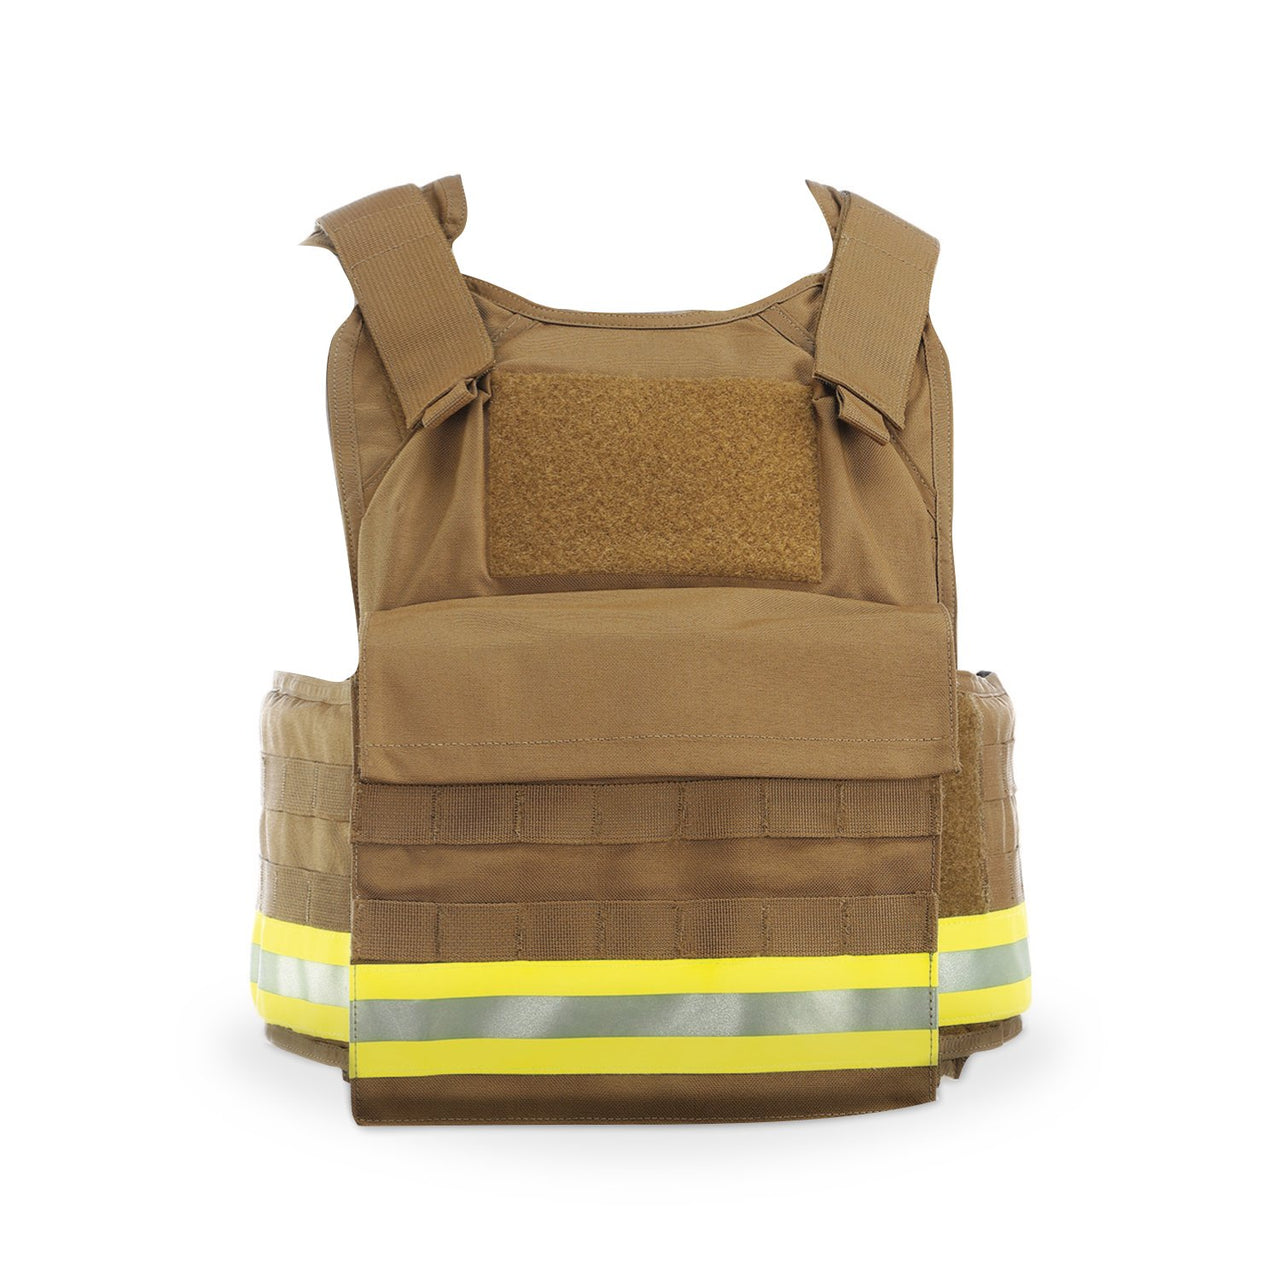 A Body Armor Direct Fire Plate Carrier Tactical Enhanced Multi-Threat Vest on a white background.